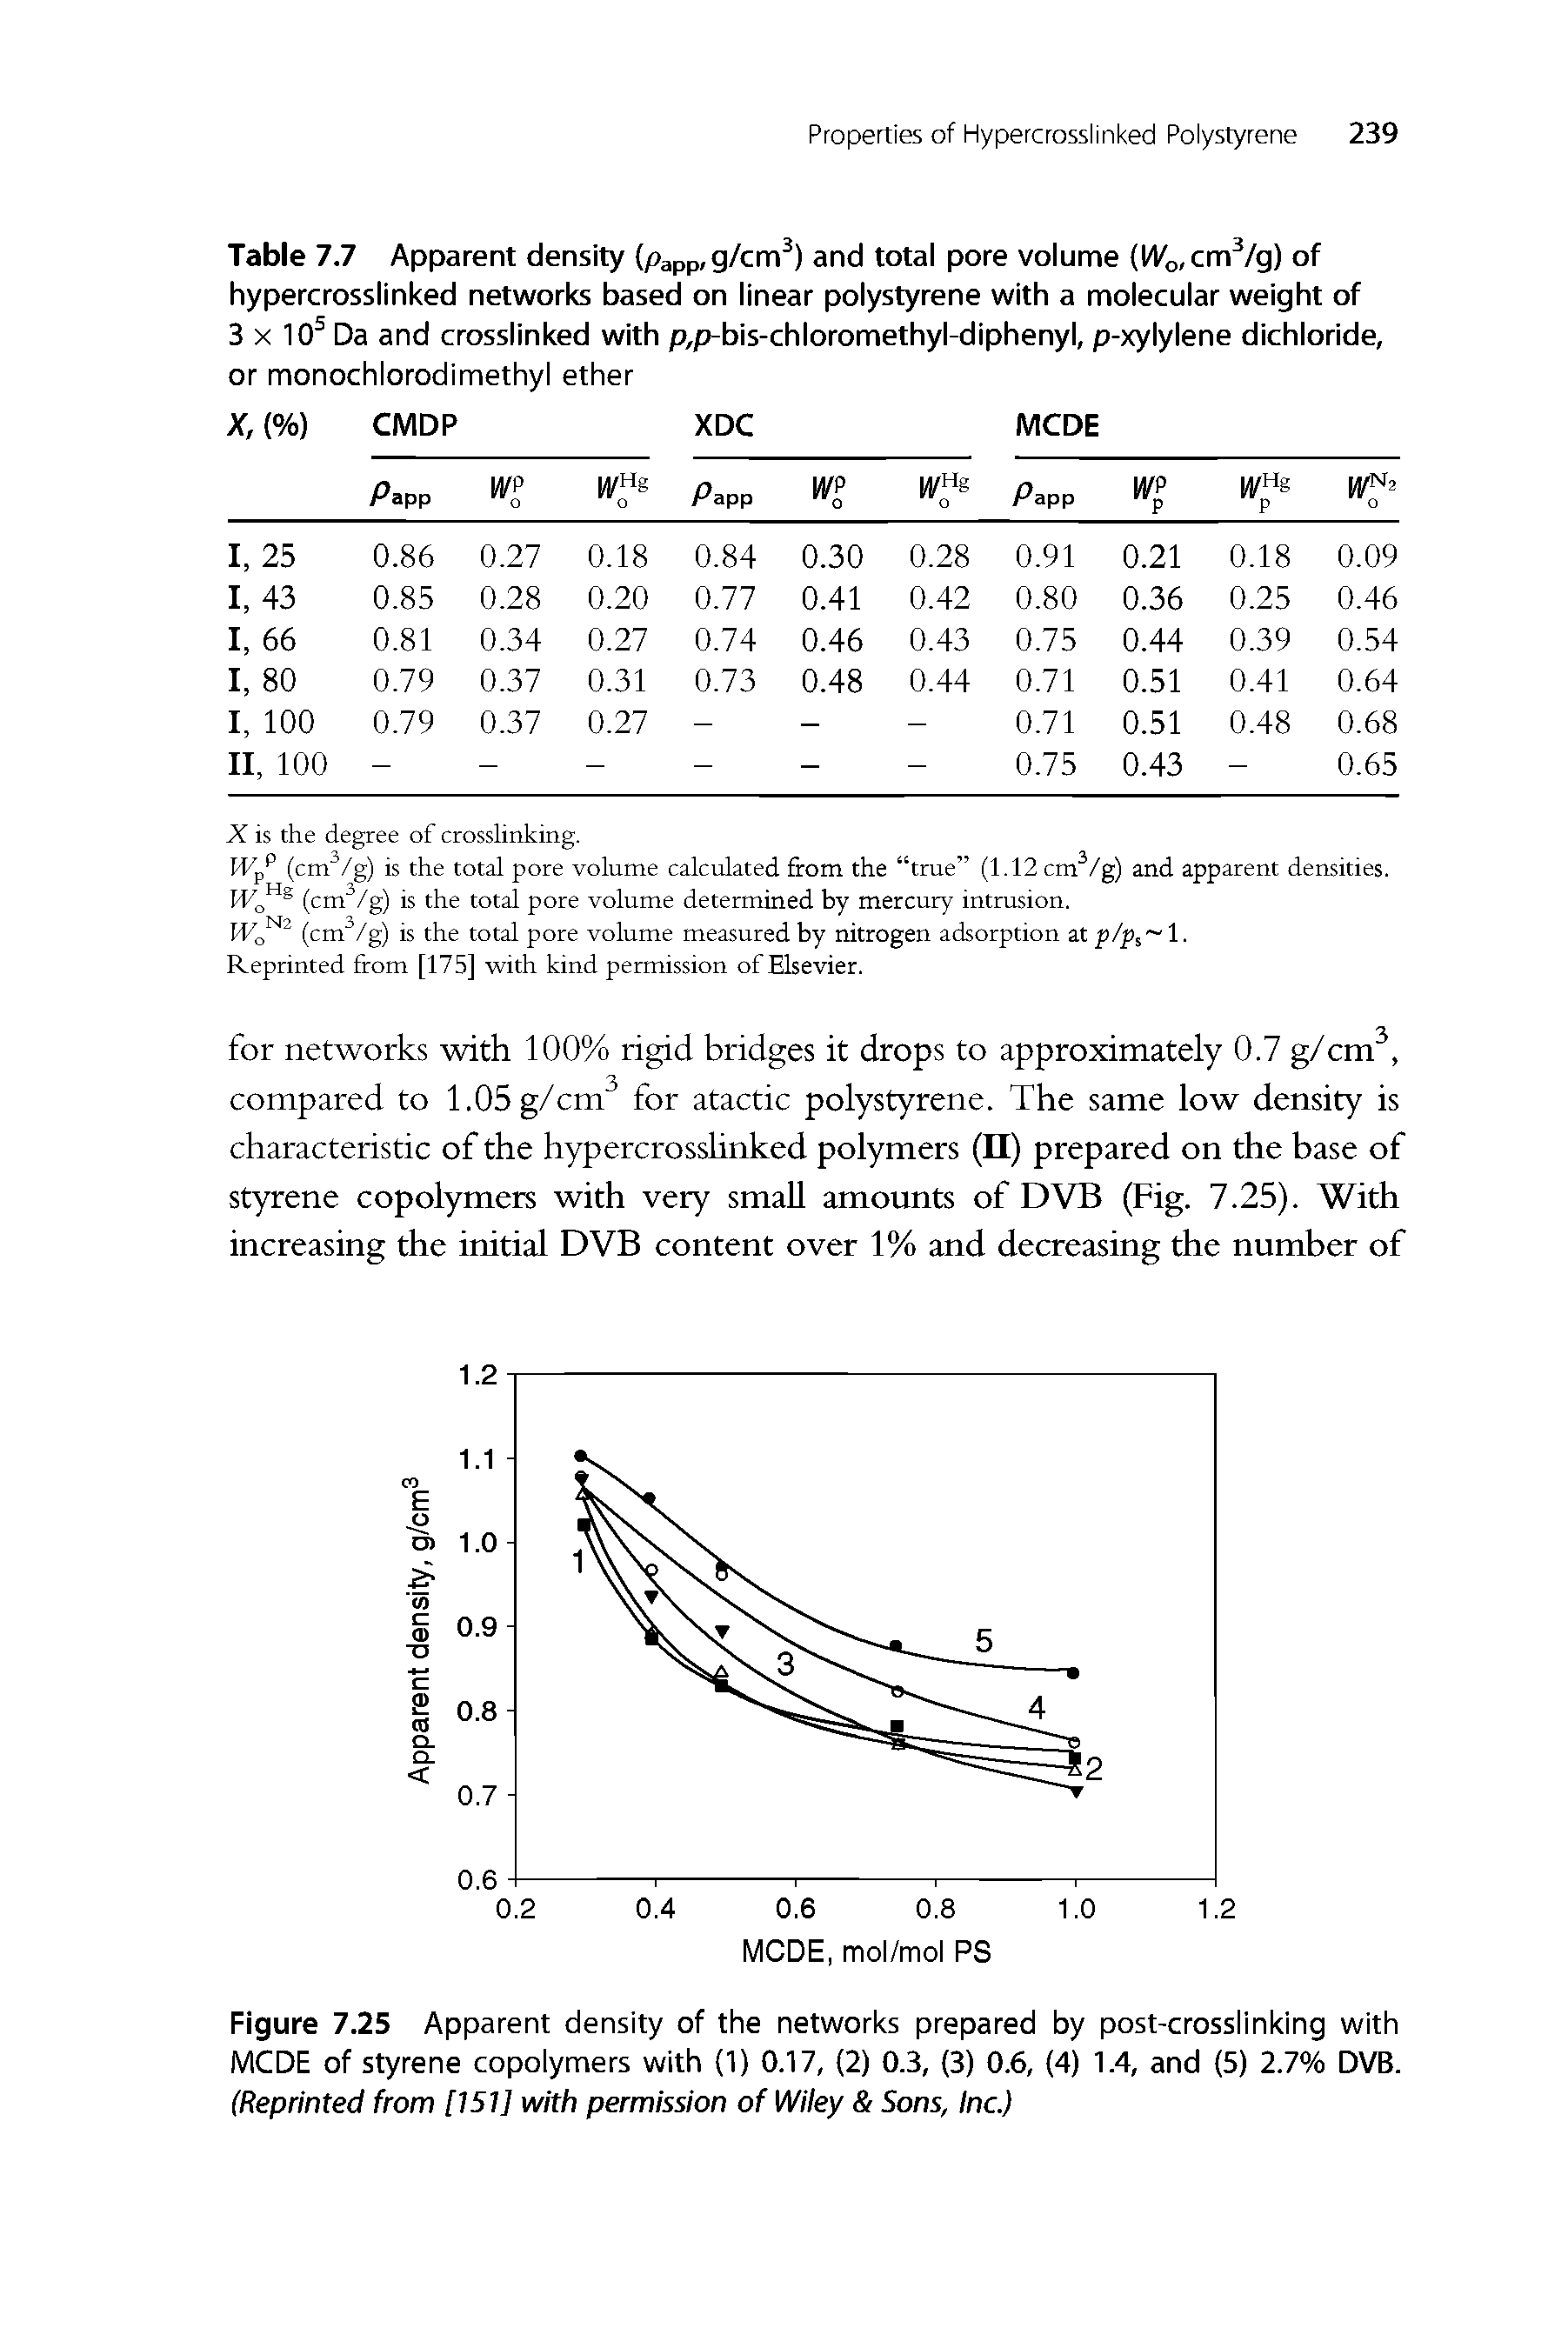 Table 7.7 Apparent density (papp g/cm ) and total pore volume (Mfo/CmVg) of hypercrosslinked networks based on linear polystyrene with a molecular weight of 3 X 10 Da and crosslinked with p,p-bis-chloromethyl-diphenyl, p-xylylene dichloride, or monochlorodimethyl ether...